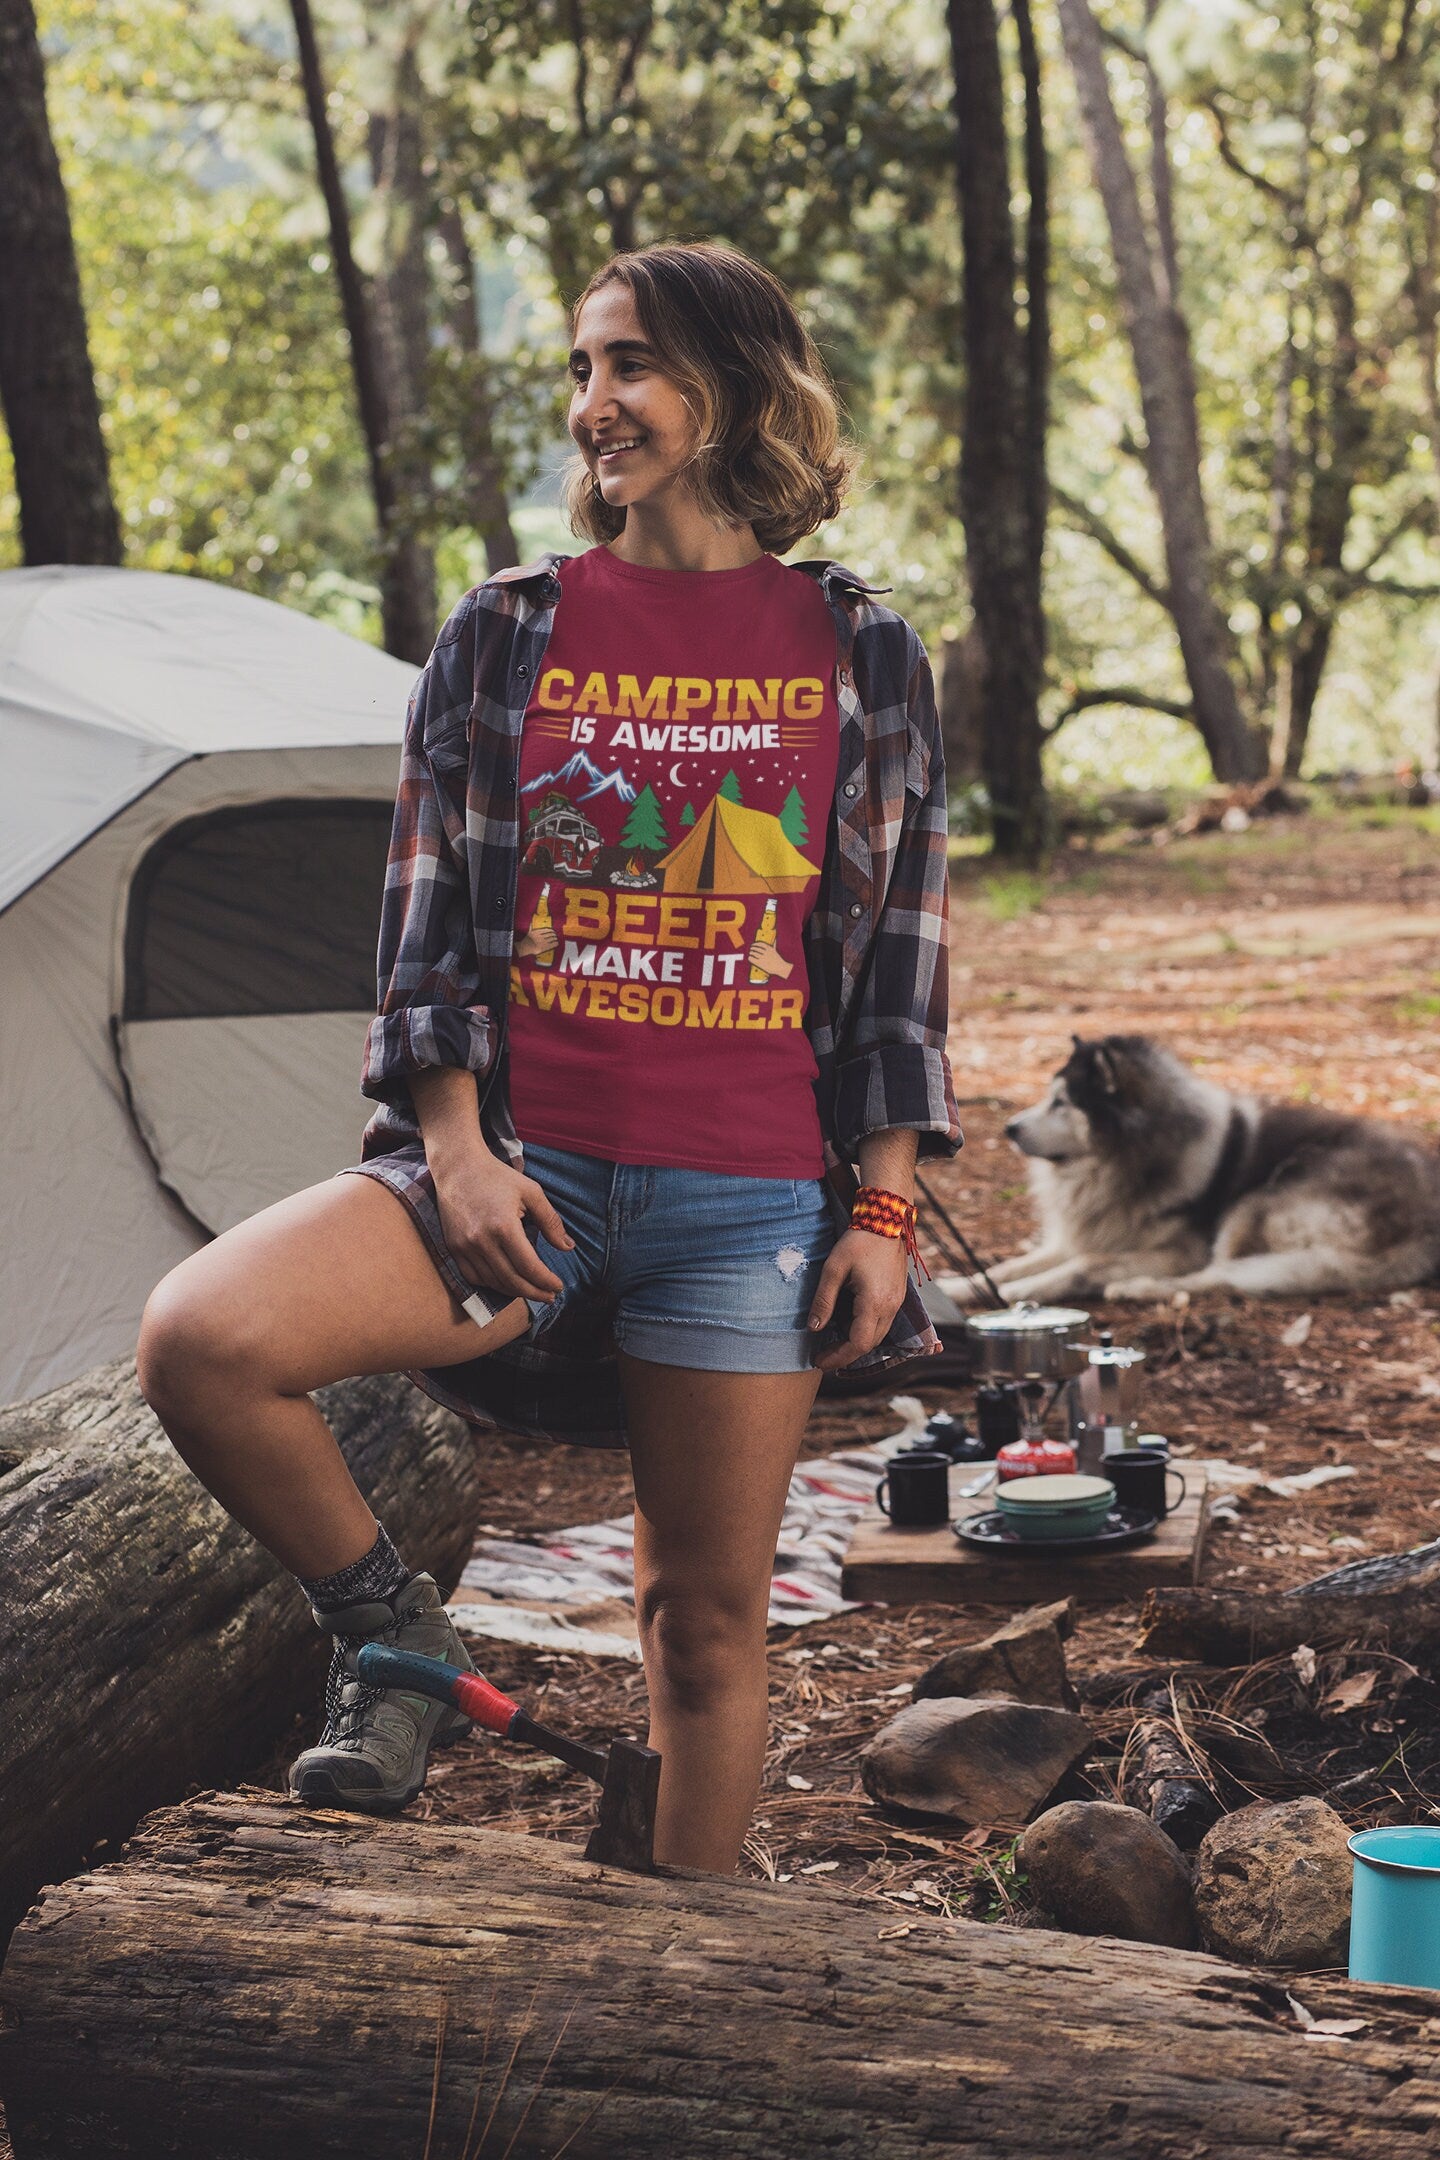 Camping is Awesome, Beer makes it Awesomer Unisex Jersey Short Sleeve Tee